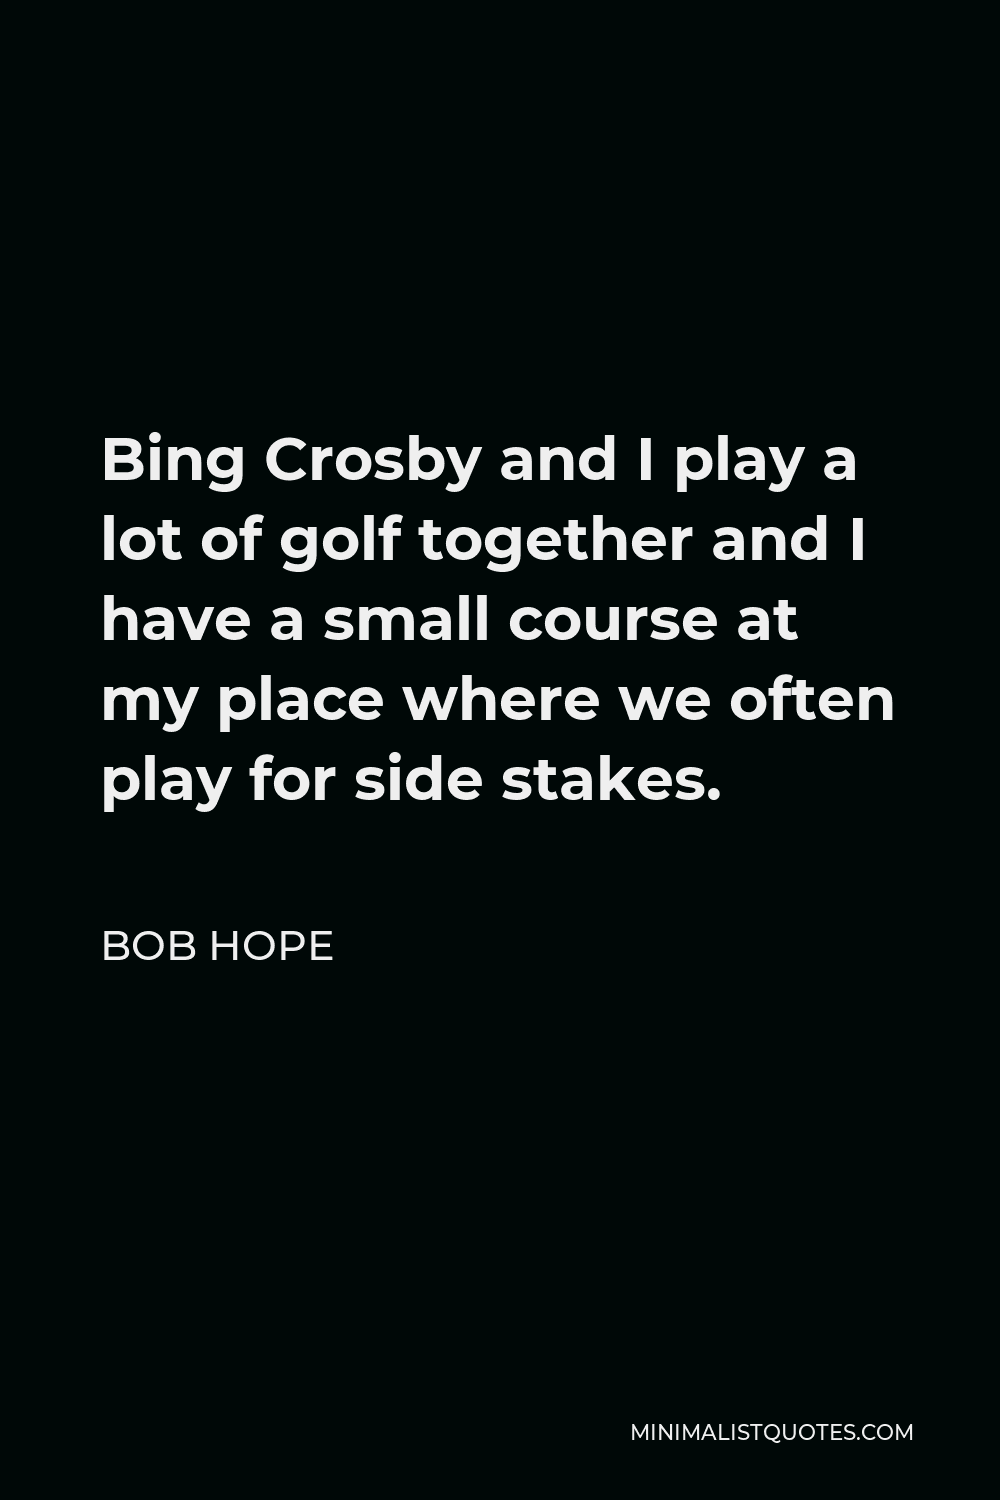 Bob Hope Quote - Bing Crosby and I play a lot of golf together and I have a small course at my place where we often play for side stakes.